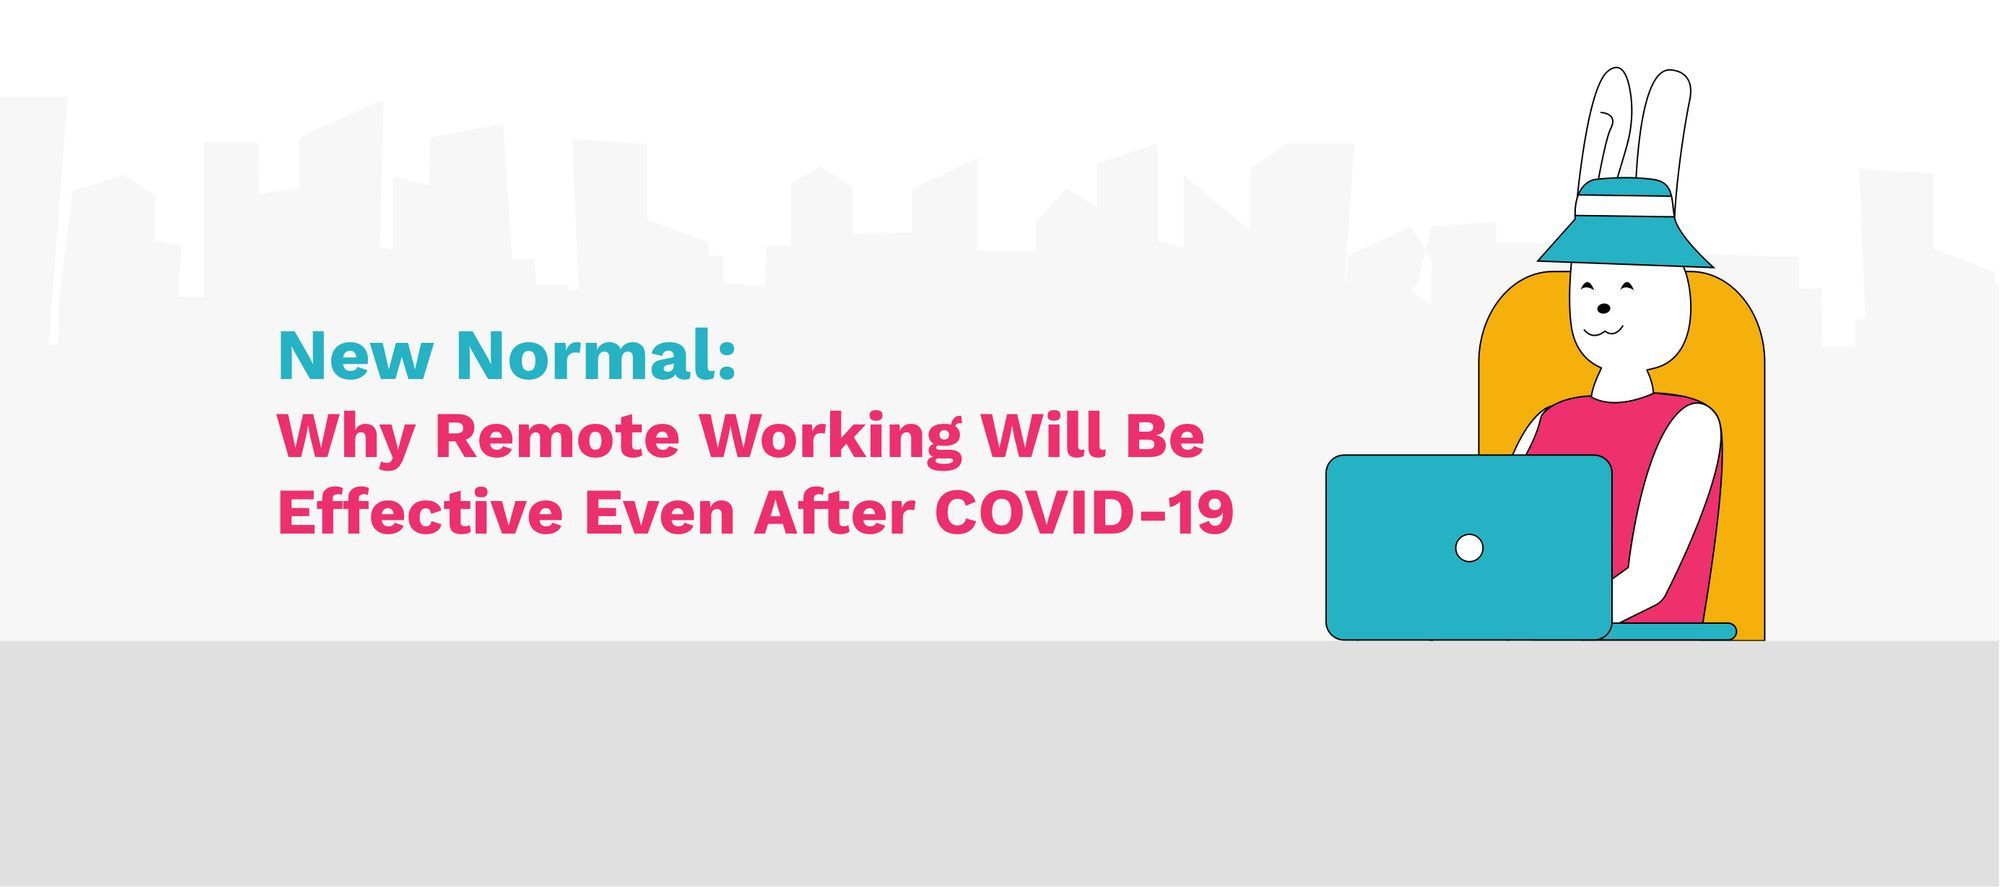 5 Reasons Remote Working is Here to Stay Even After COVID-19